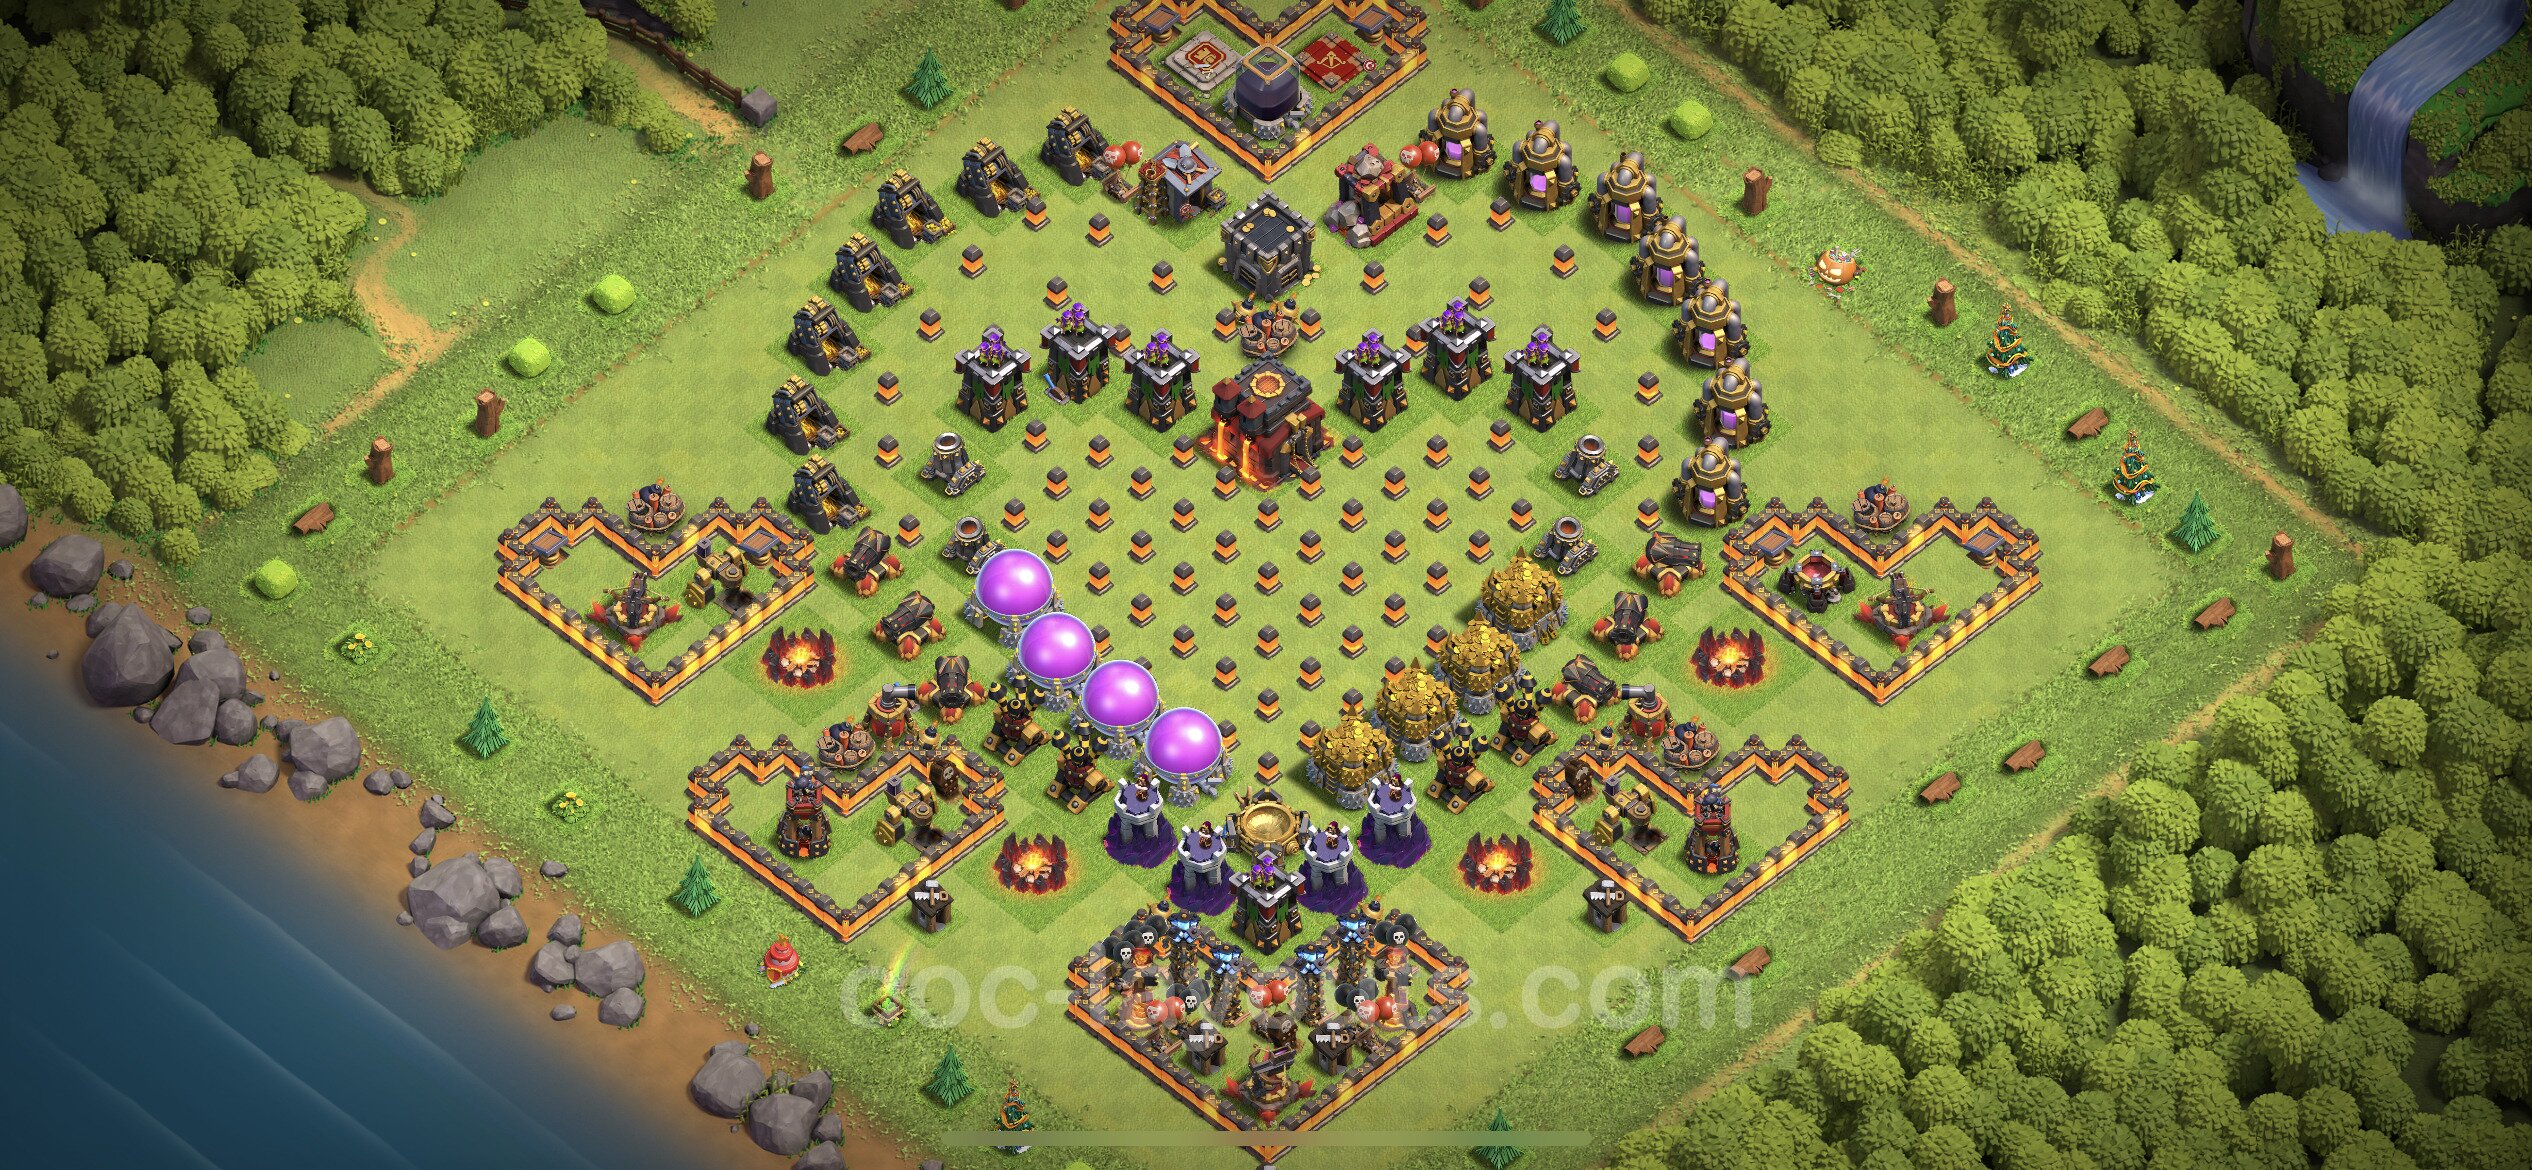 Top Troll Funny Base TH10 with Link - Funny Art Plan 2021 - Clash of Clans...